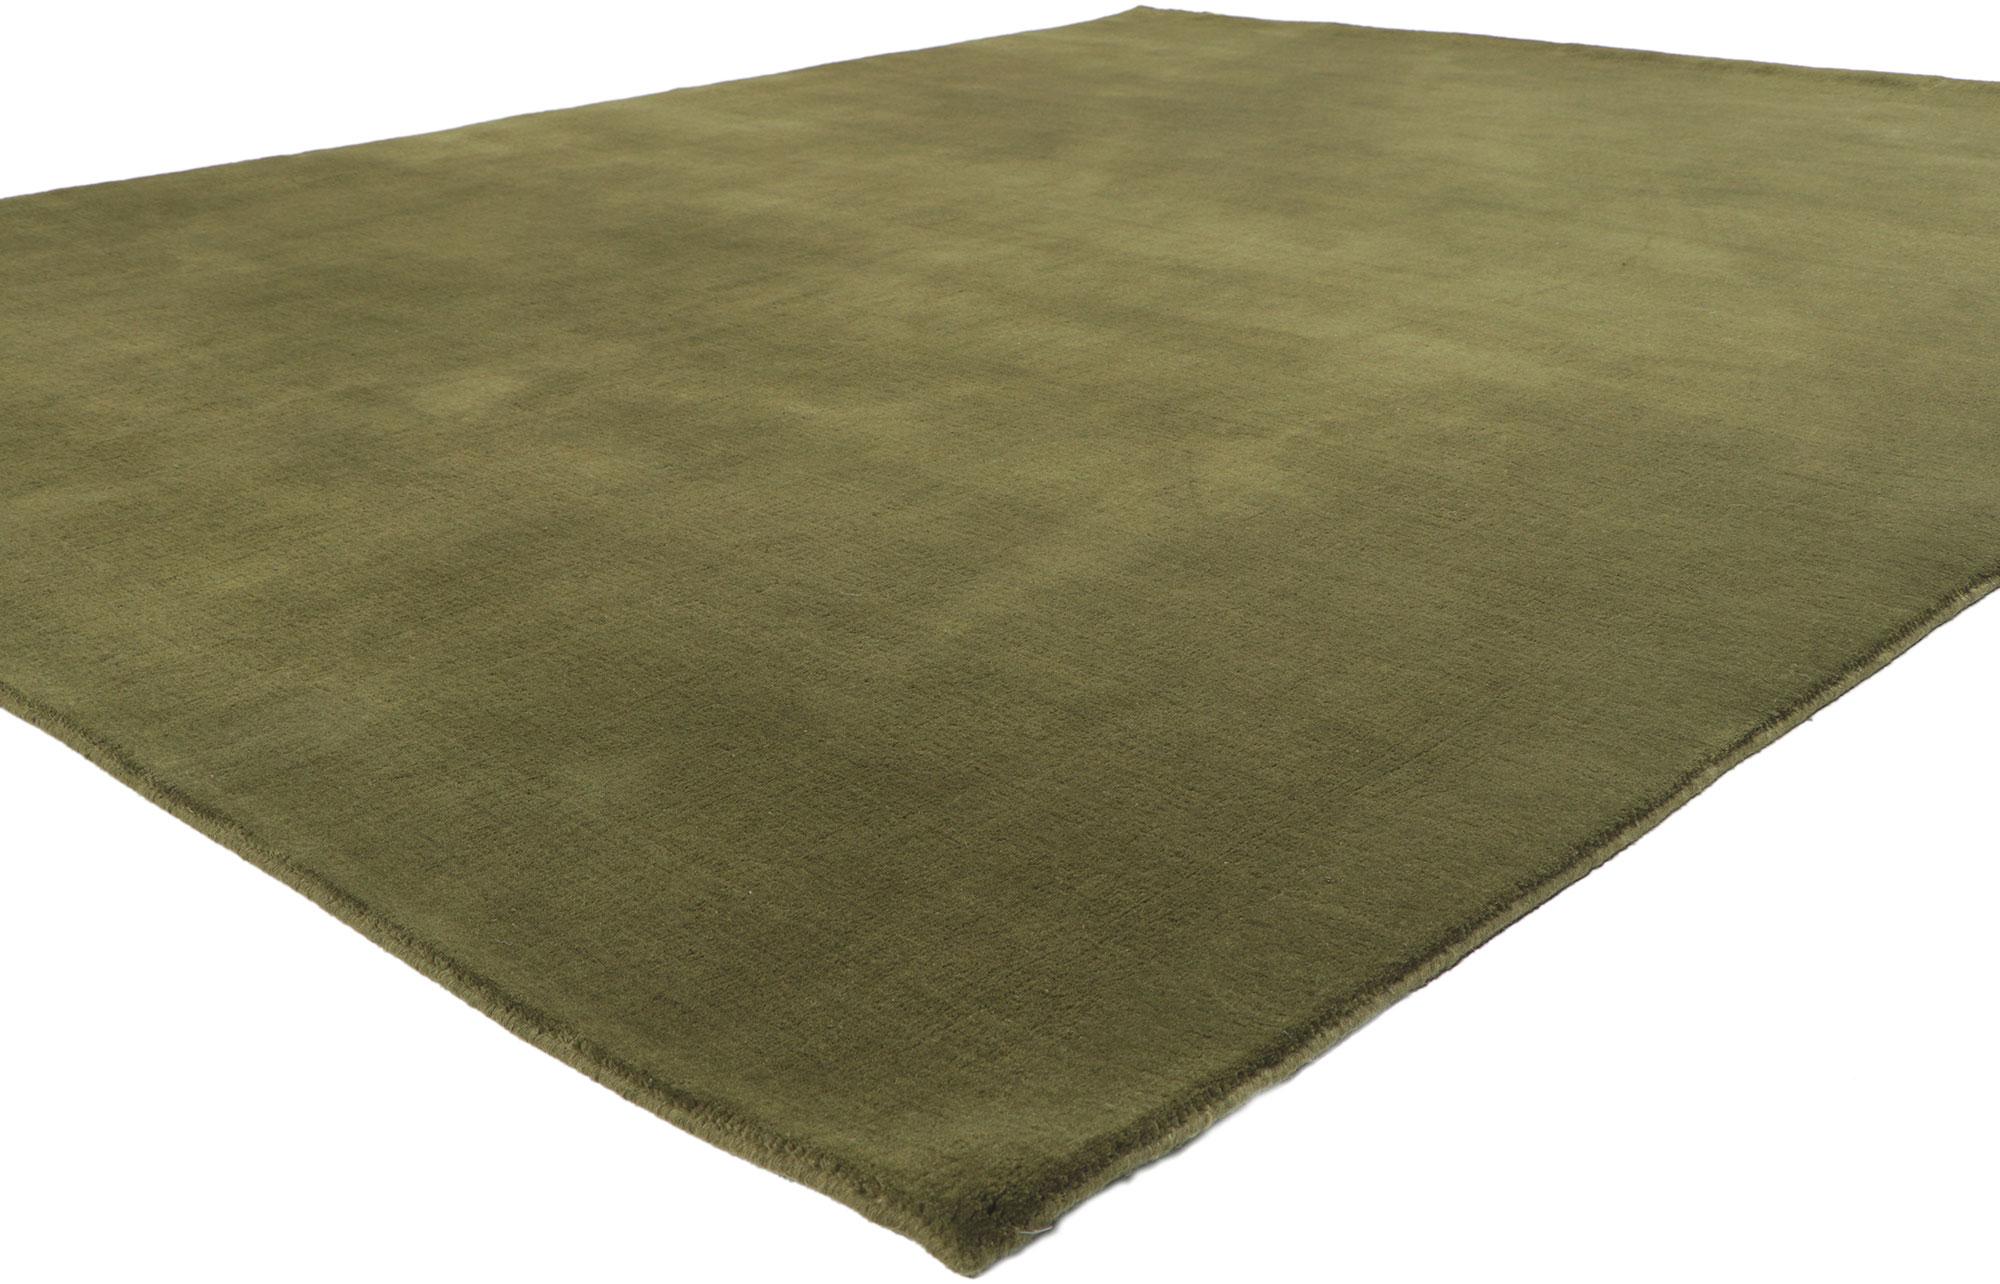 30927 New Moss-Olive Green Modern Rug, 07'11 x 09'10. Implementing biophilia with subdued ornamentation, this modern area rug is a captivating vision of woven beauty. The lavish texture and earthy green colorway woven into this piece work together